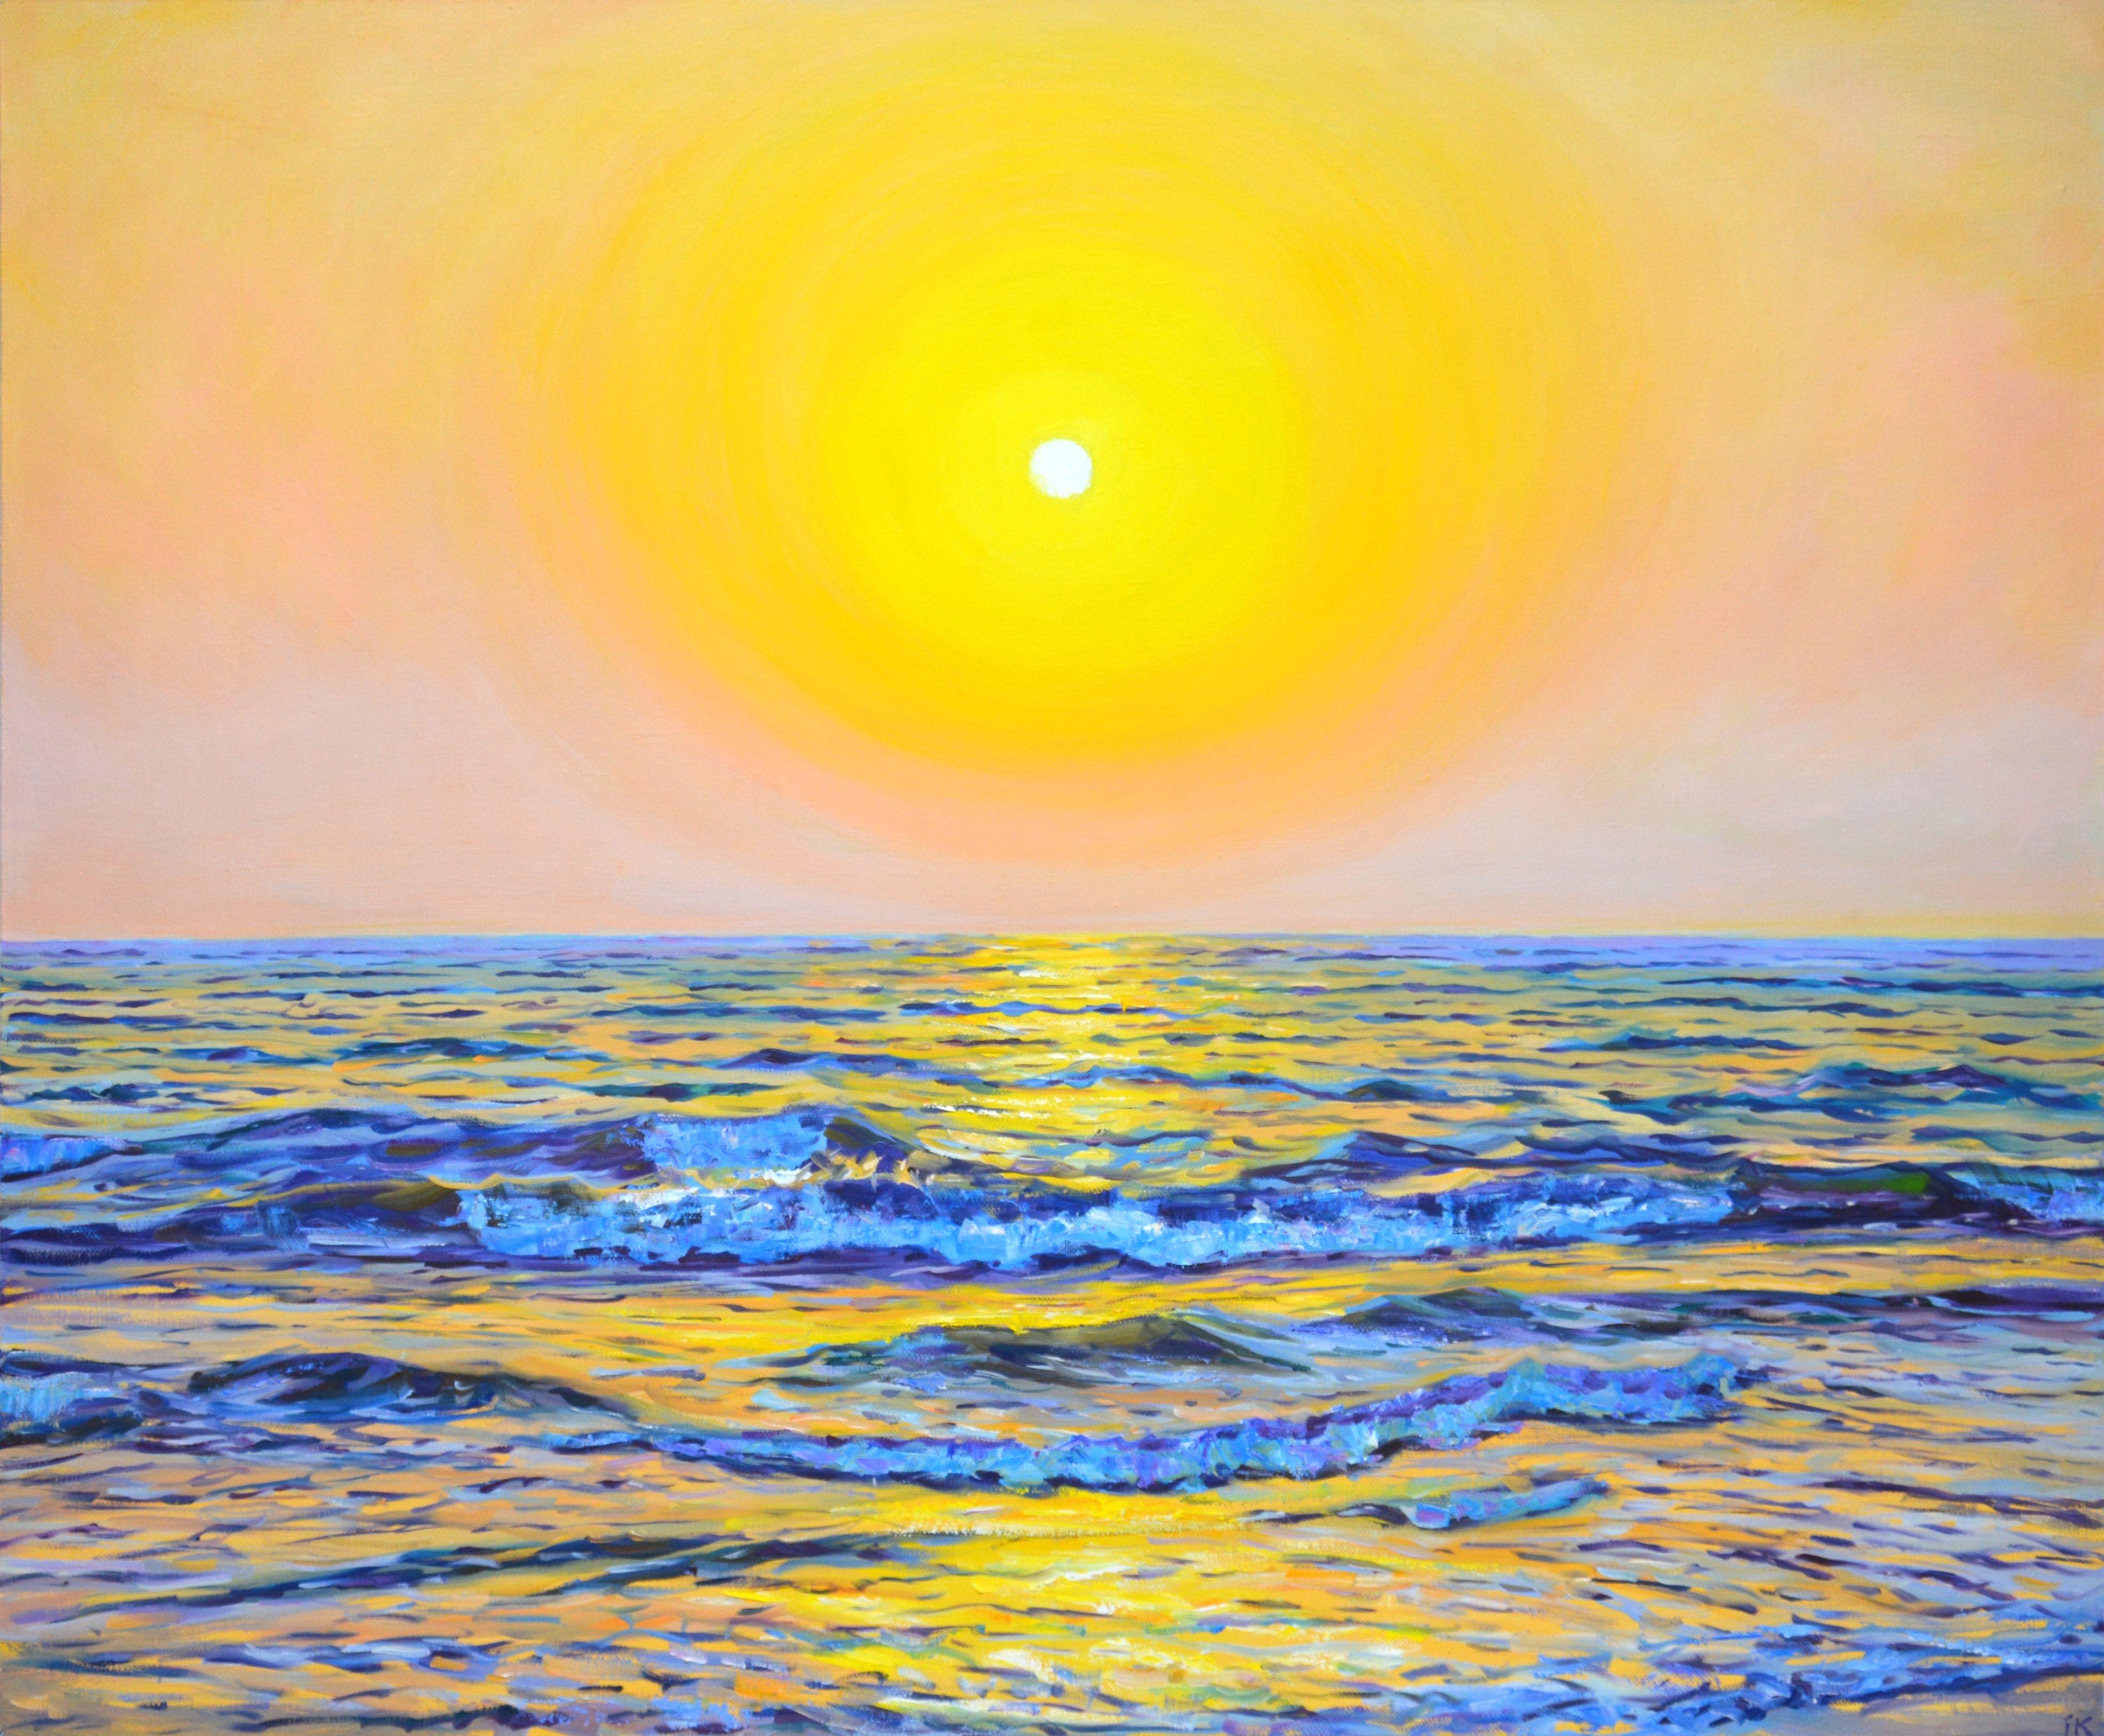 Pink evening. Ocean.  sunset, warm water, ocean, sea, small waves, sun reflection, clear sky, create an atmosphere of relaxation and romance. Made in the style of realism, impressionism. Part of a permanent series of seascapes. Used high quality